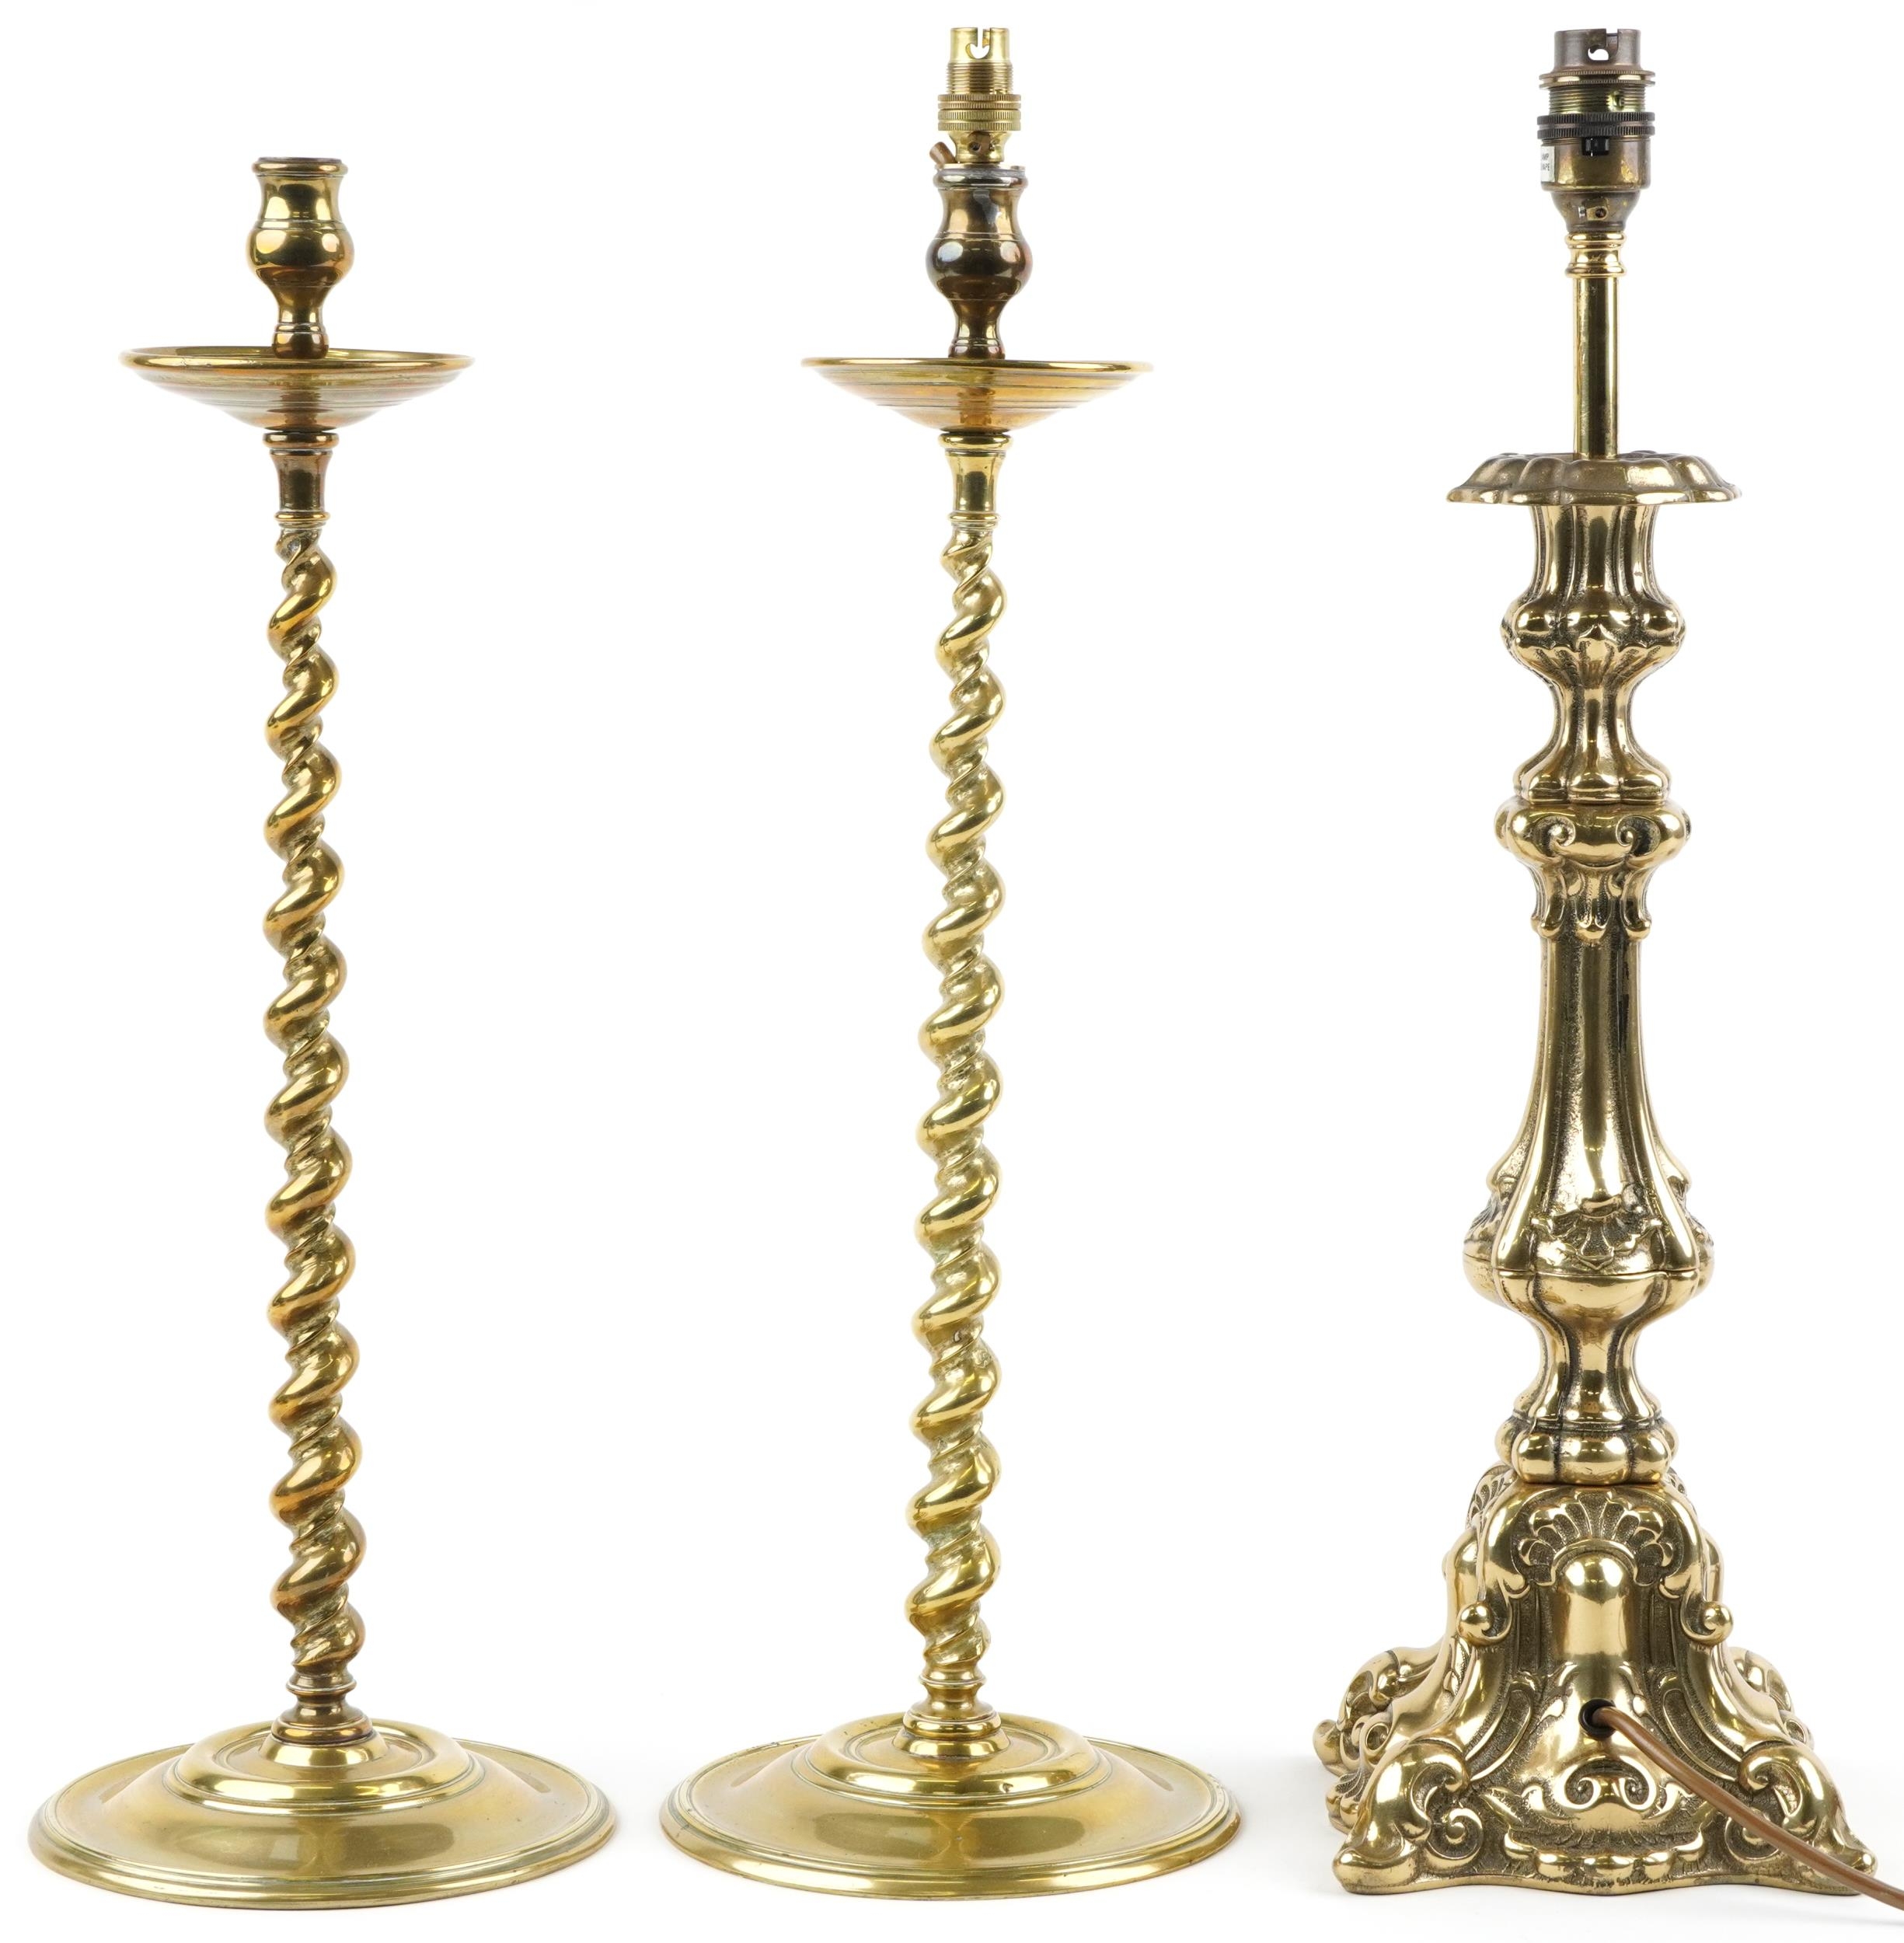 Pair of 19th century turned brass barley twist candlesticks and a classical brass table lamp, 51cm - Image 2 of 3